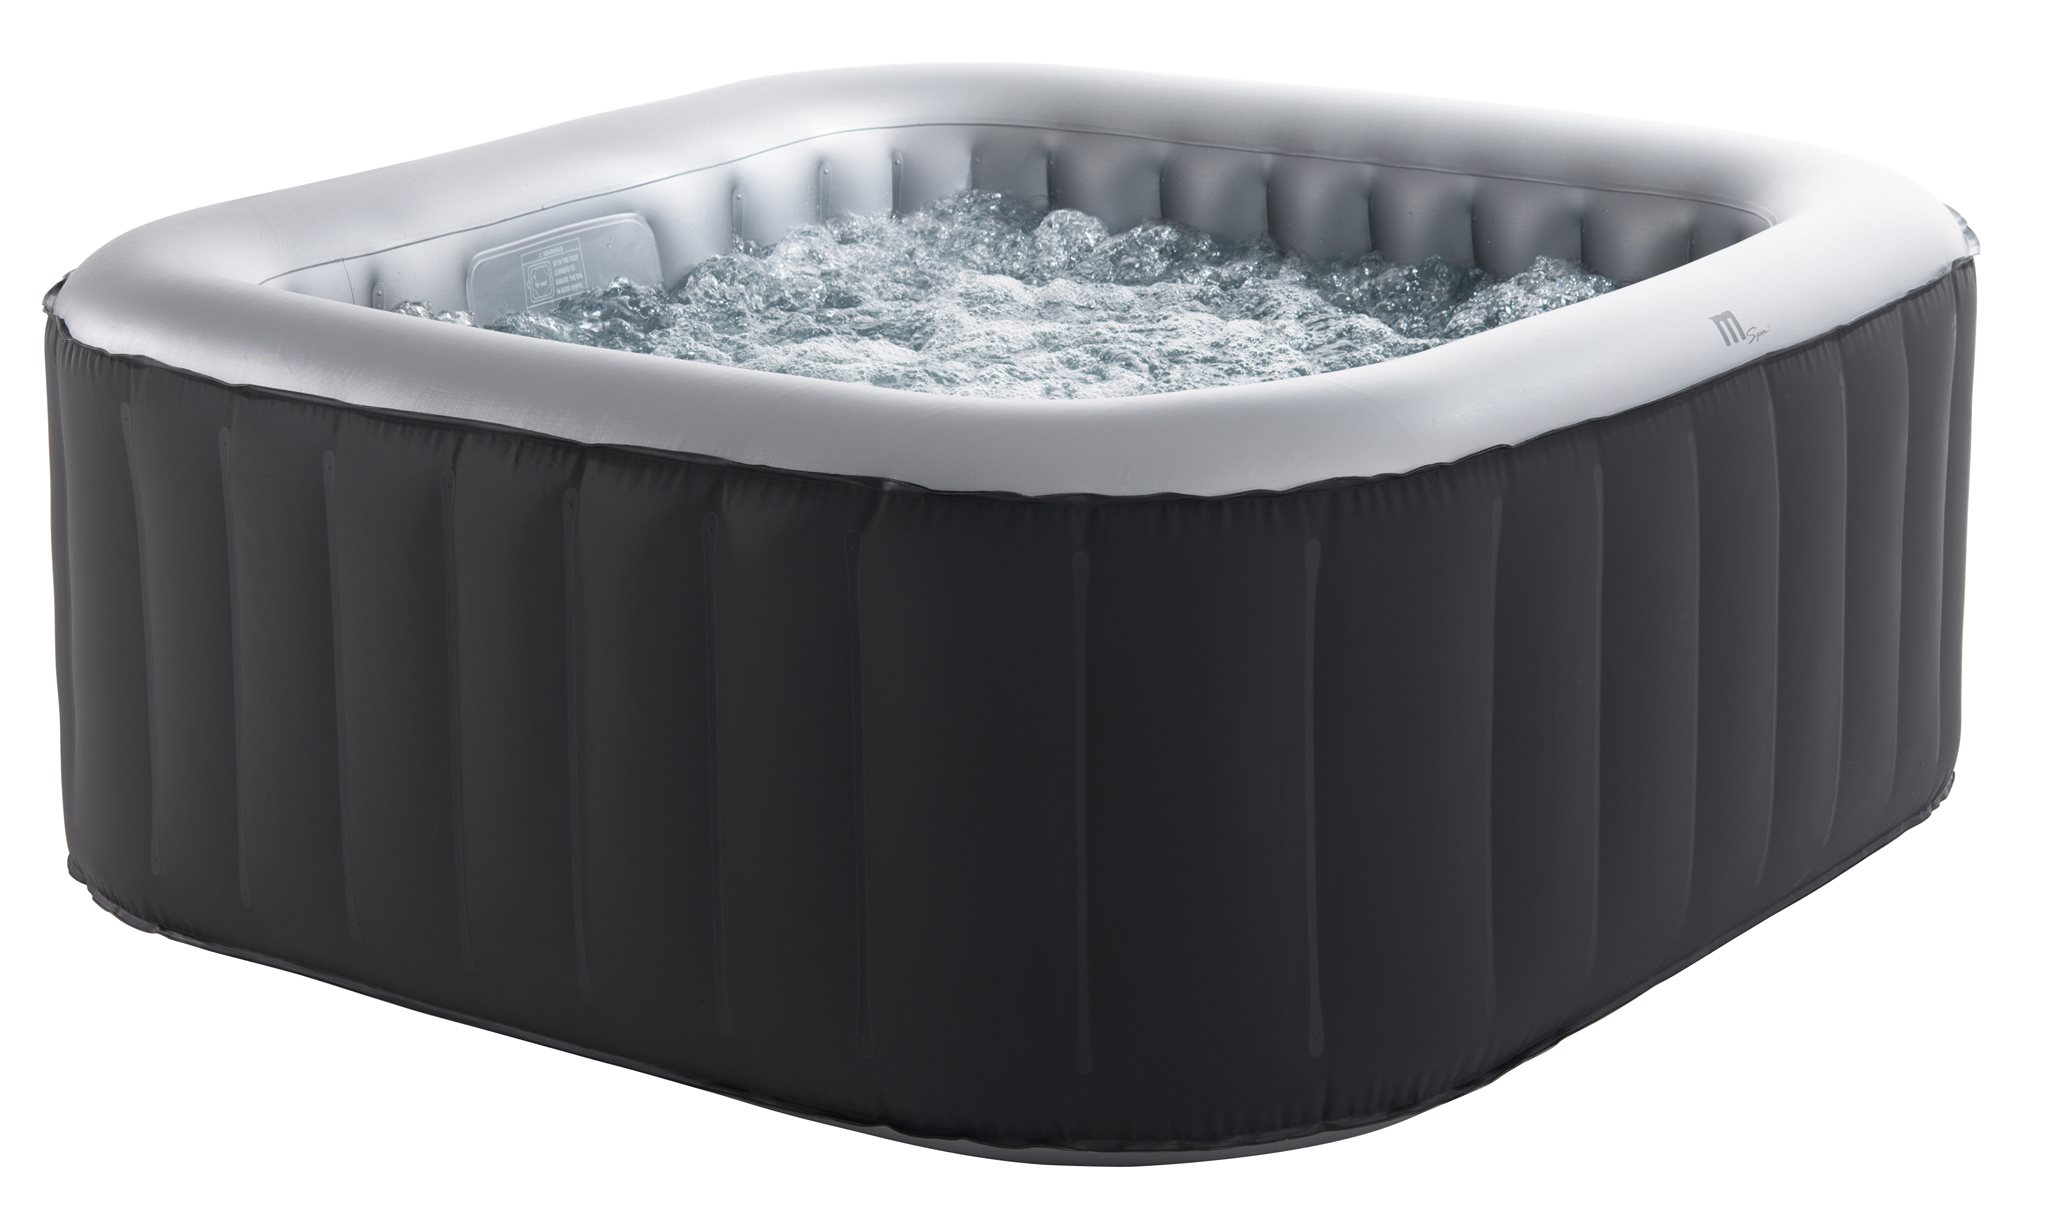 MSpa Delight series Alpine spa Relax your body, calm your mind and lift your spirits in a luxurious bath of water and bu... » Outdoor Furniture Fuengirola, Costa Del Sol, Spain